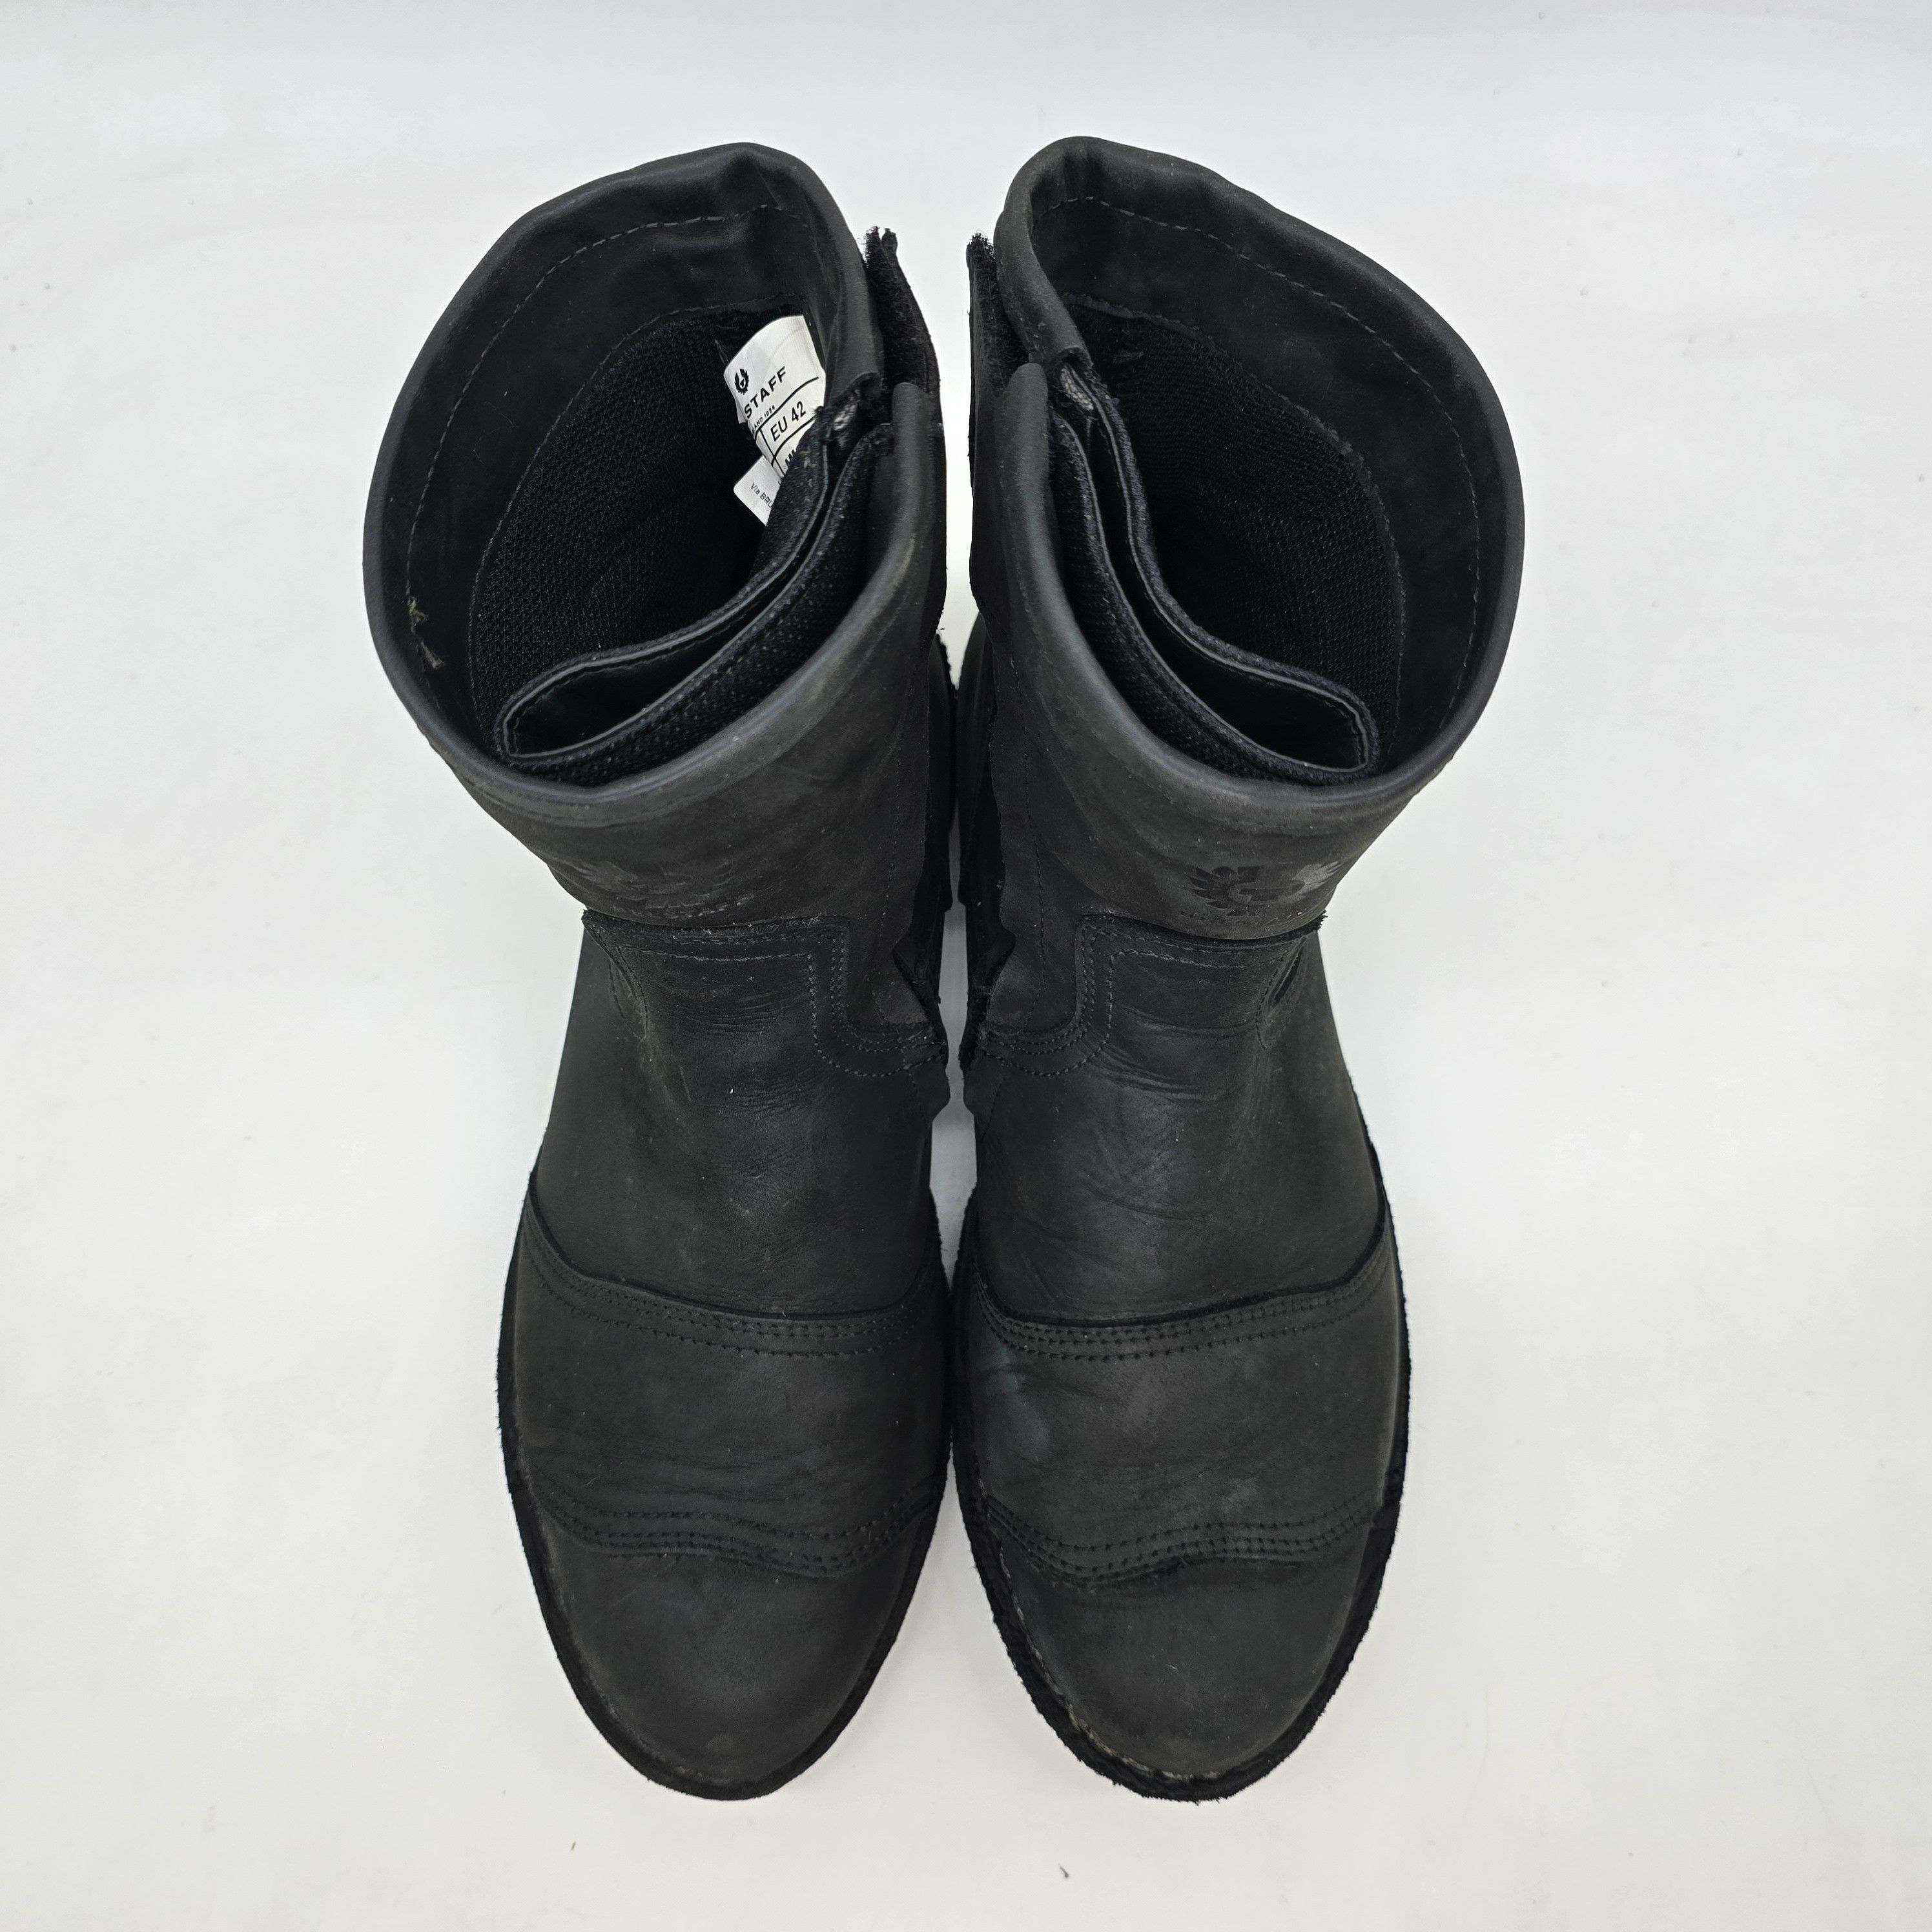 Belstaff - Duration Motorcycle Boots - 5